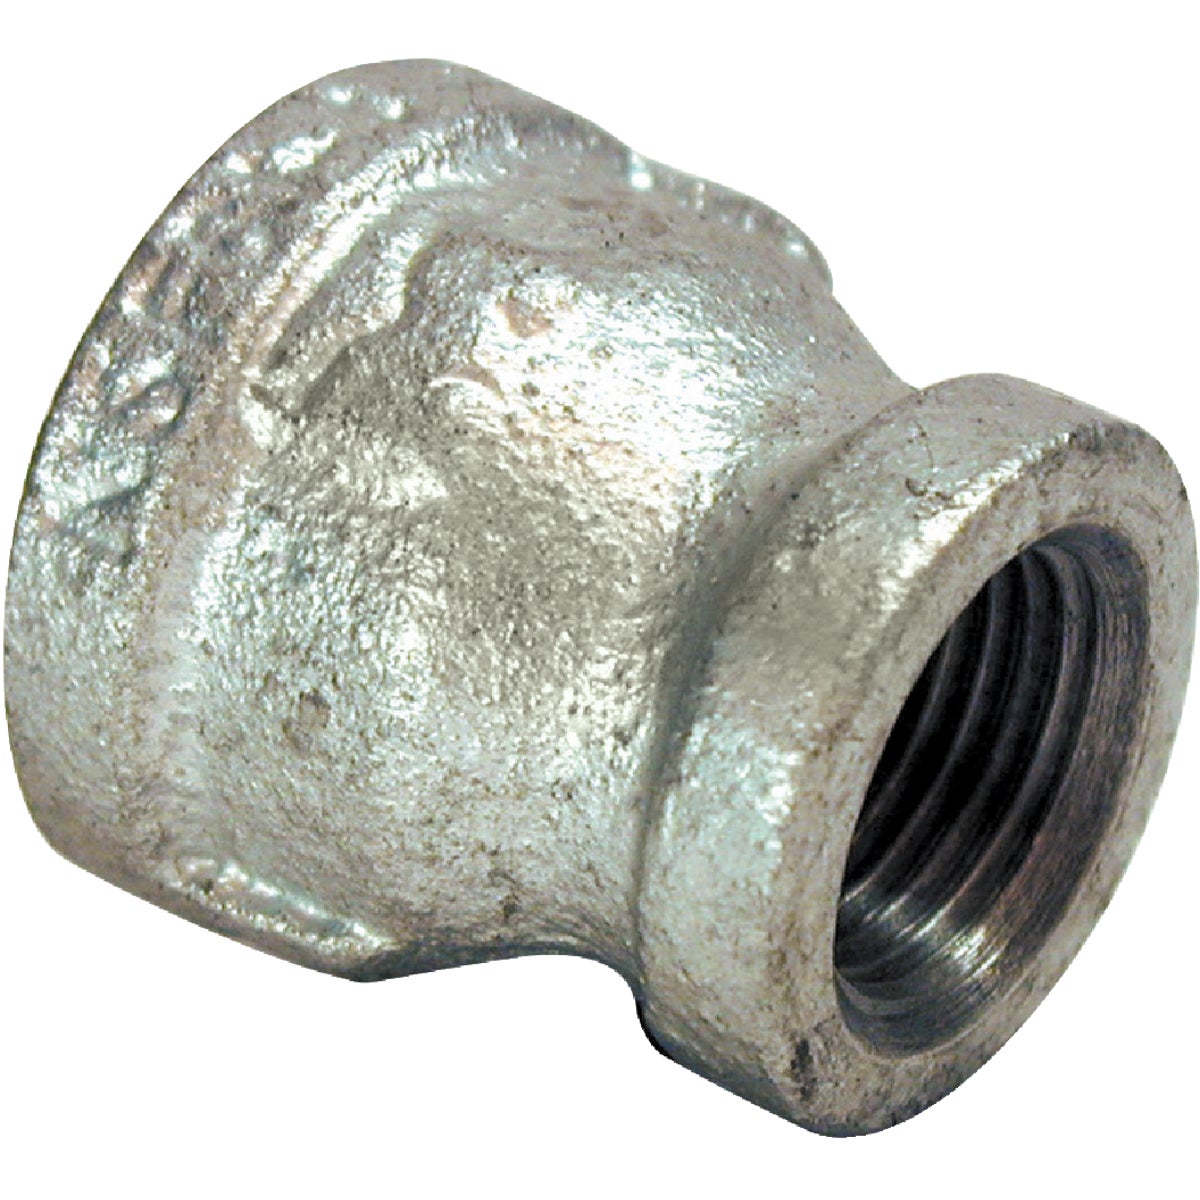 Southland 1/4 In. x 1/8 In. FPT Reducing Galvanized Coupling